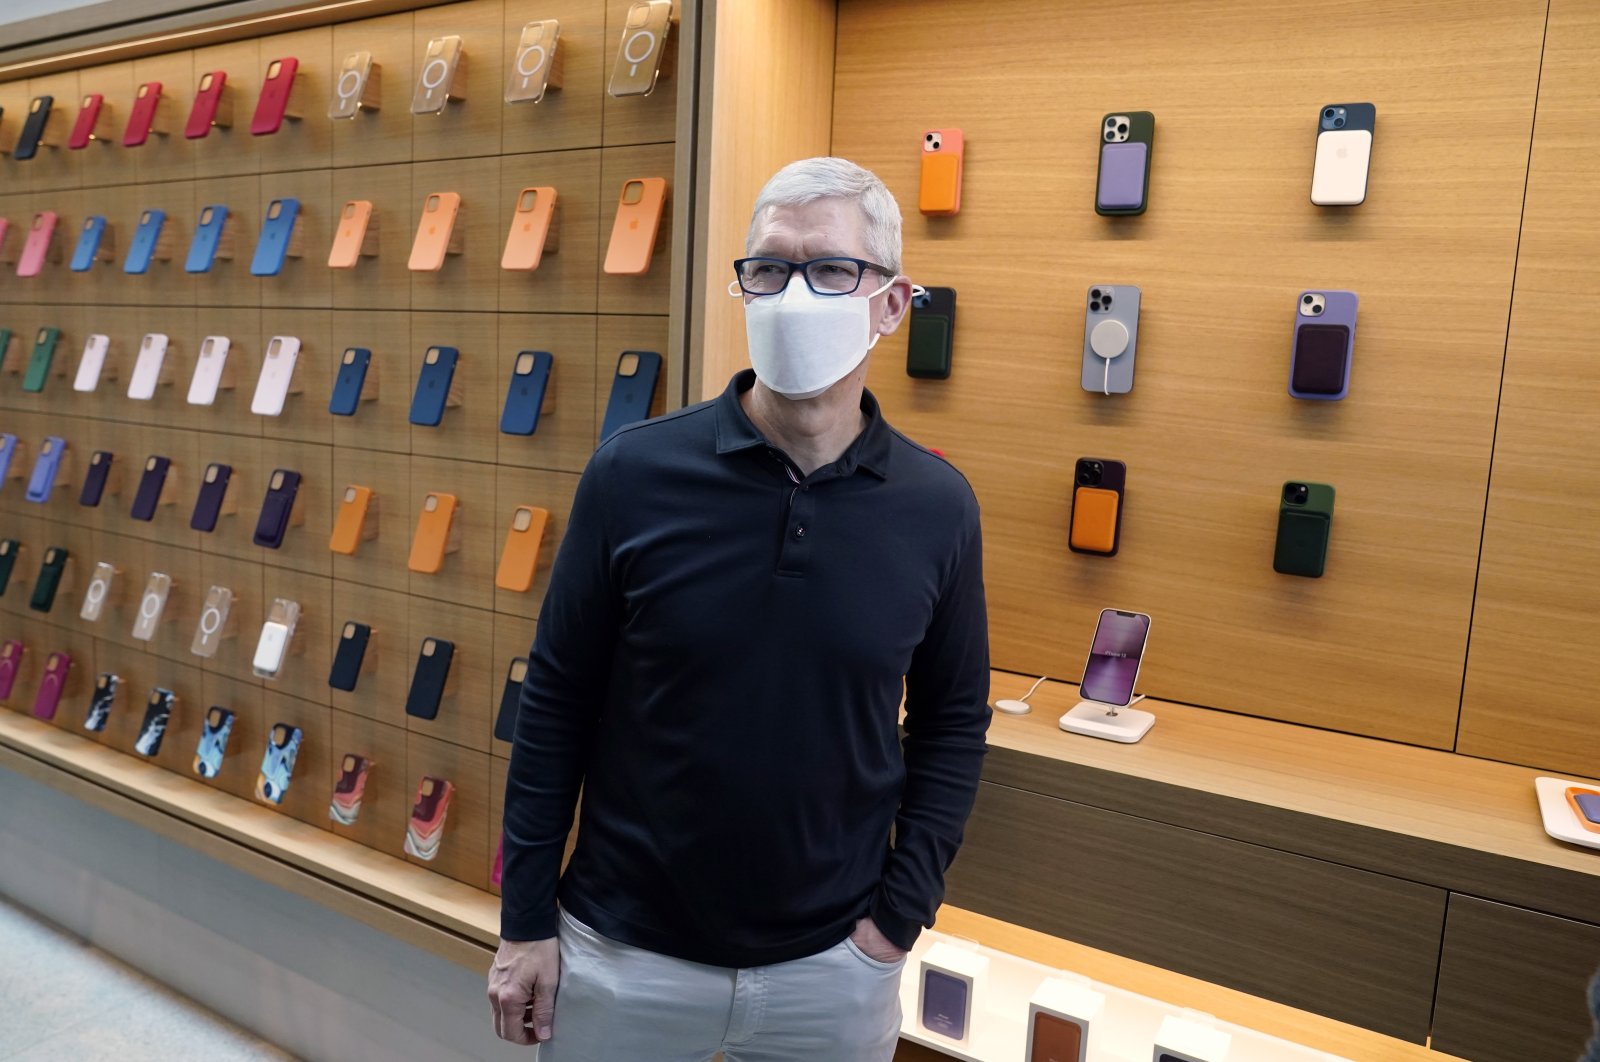 Apple CEO Tim Cook stands in front of company products during a visit to an Apple Store at The Grove, in Los Angeles, U.S., Nov. 19, 2021. (AP Photo)